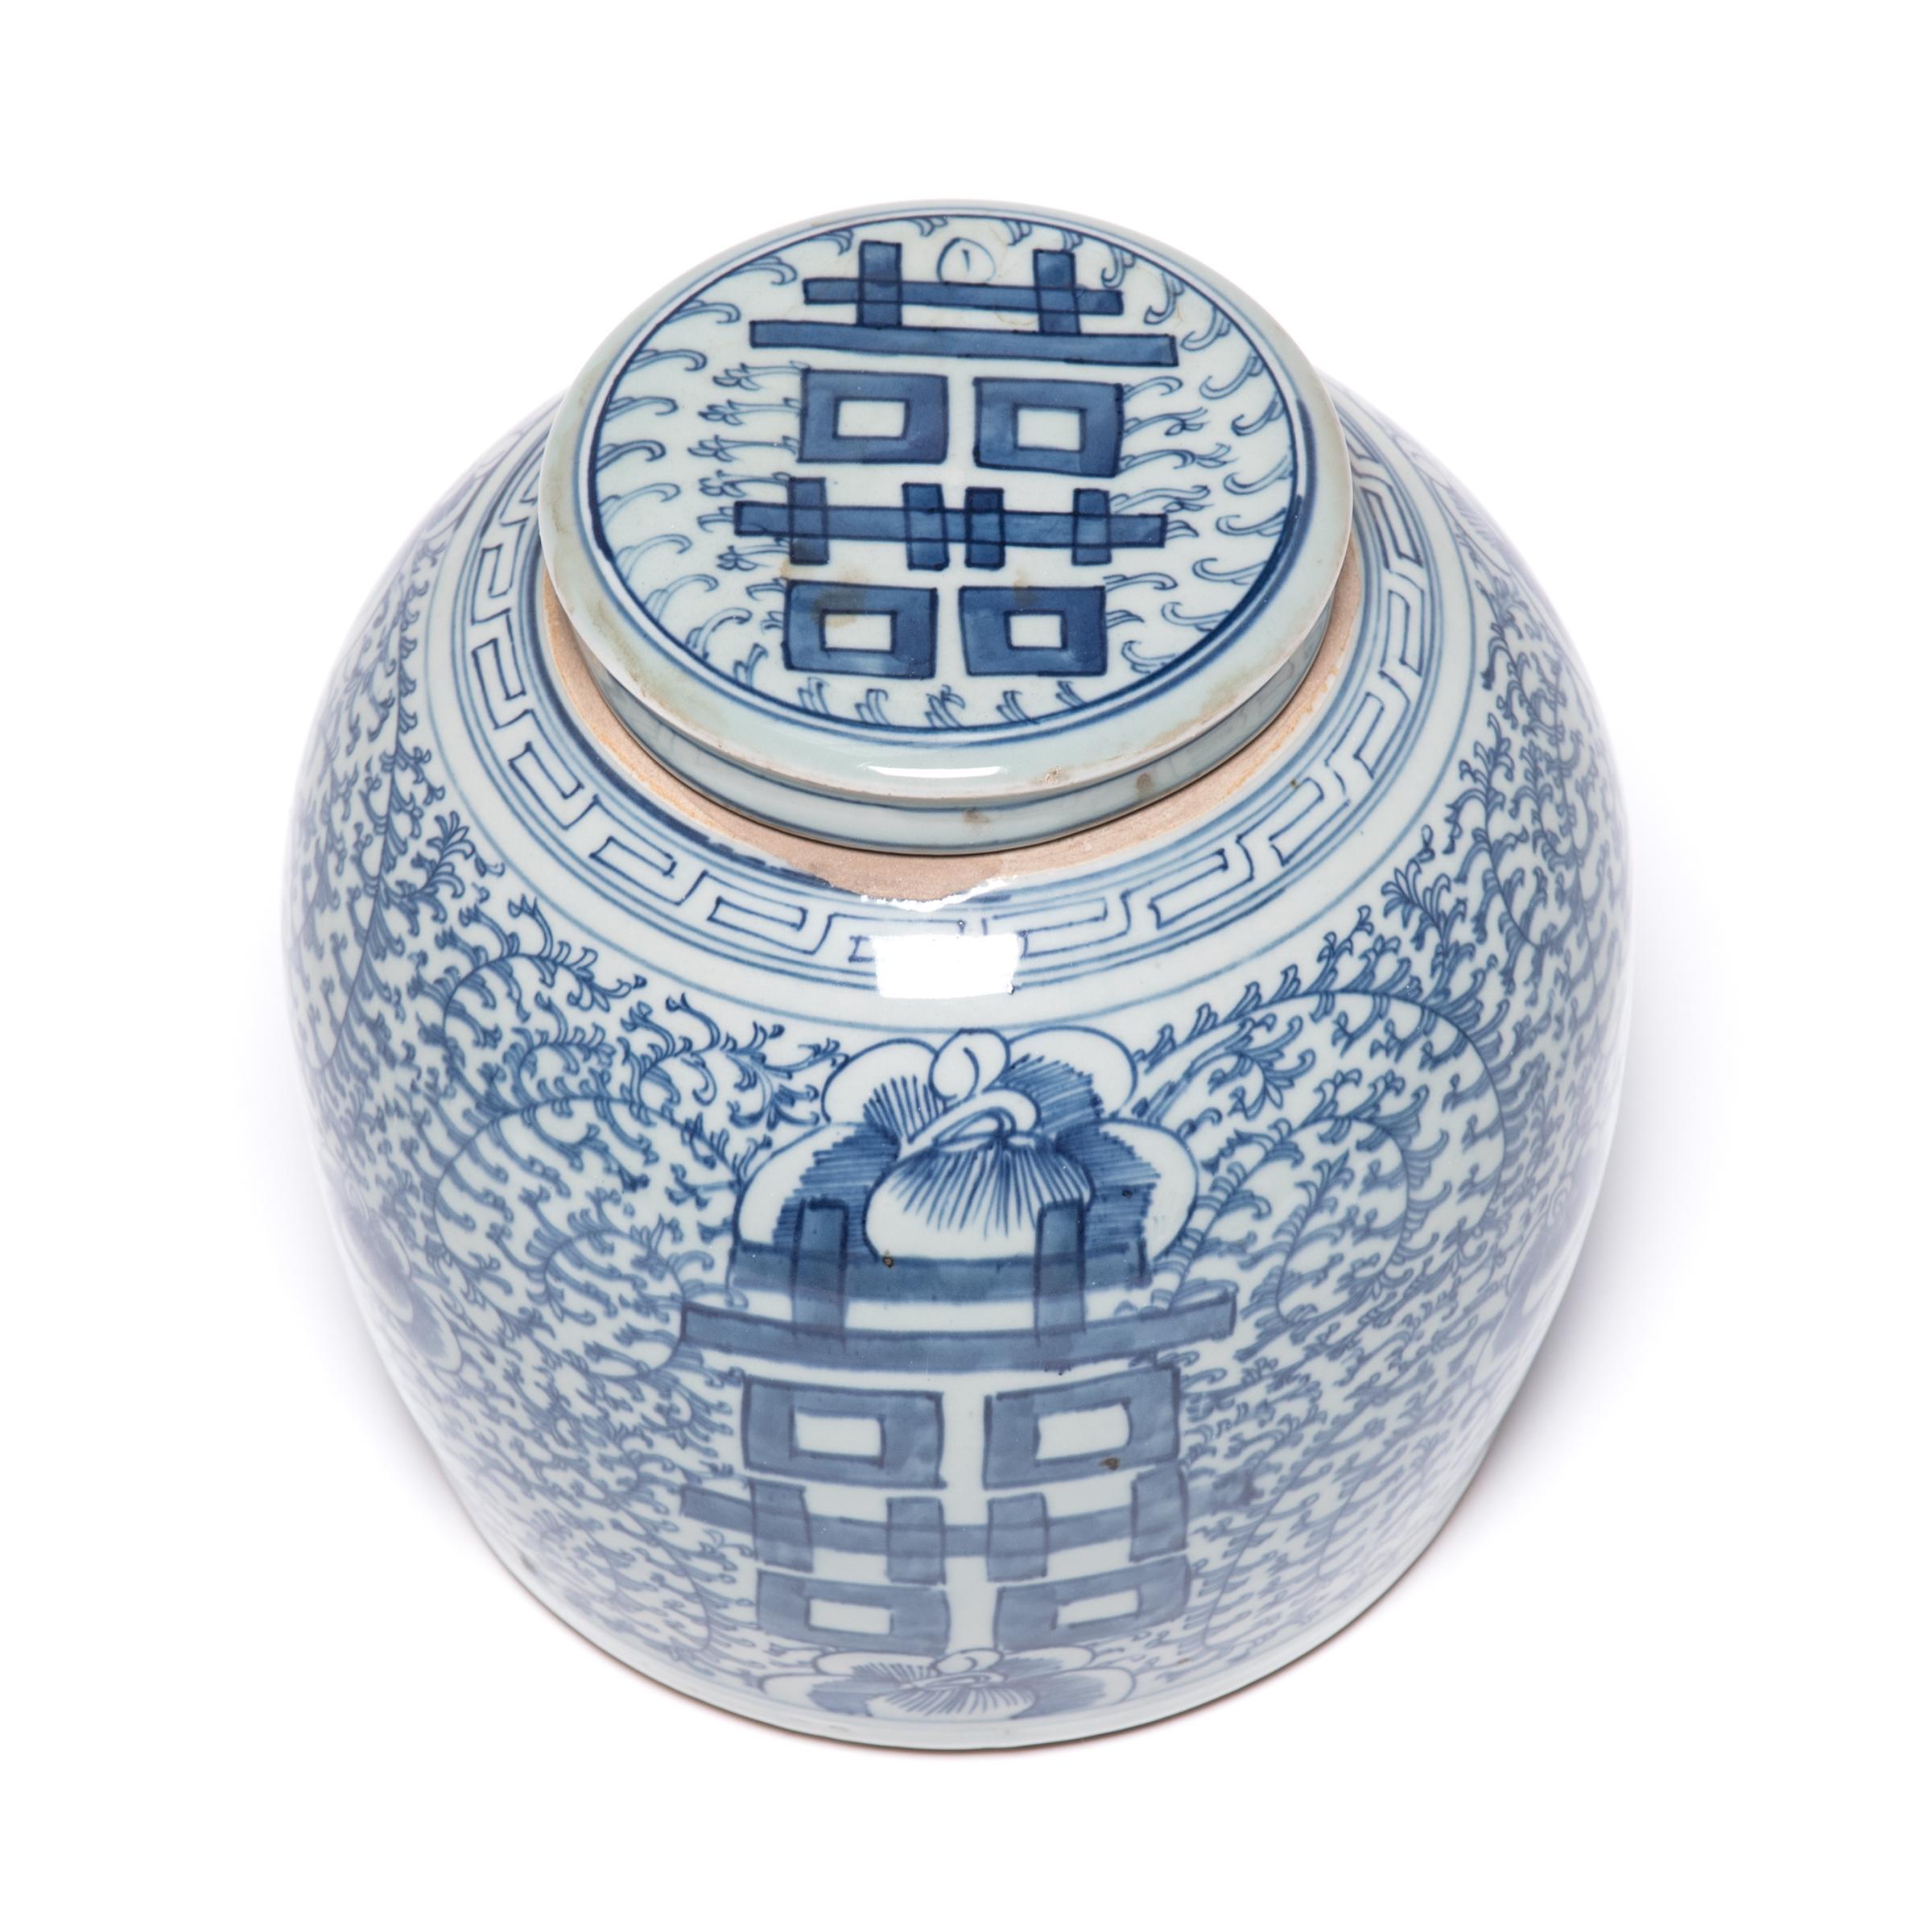 Contemporary Blue and White Chinese Double Happiness Jar